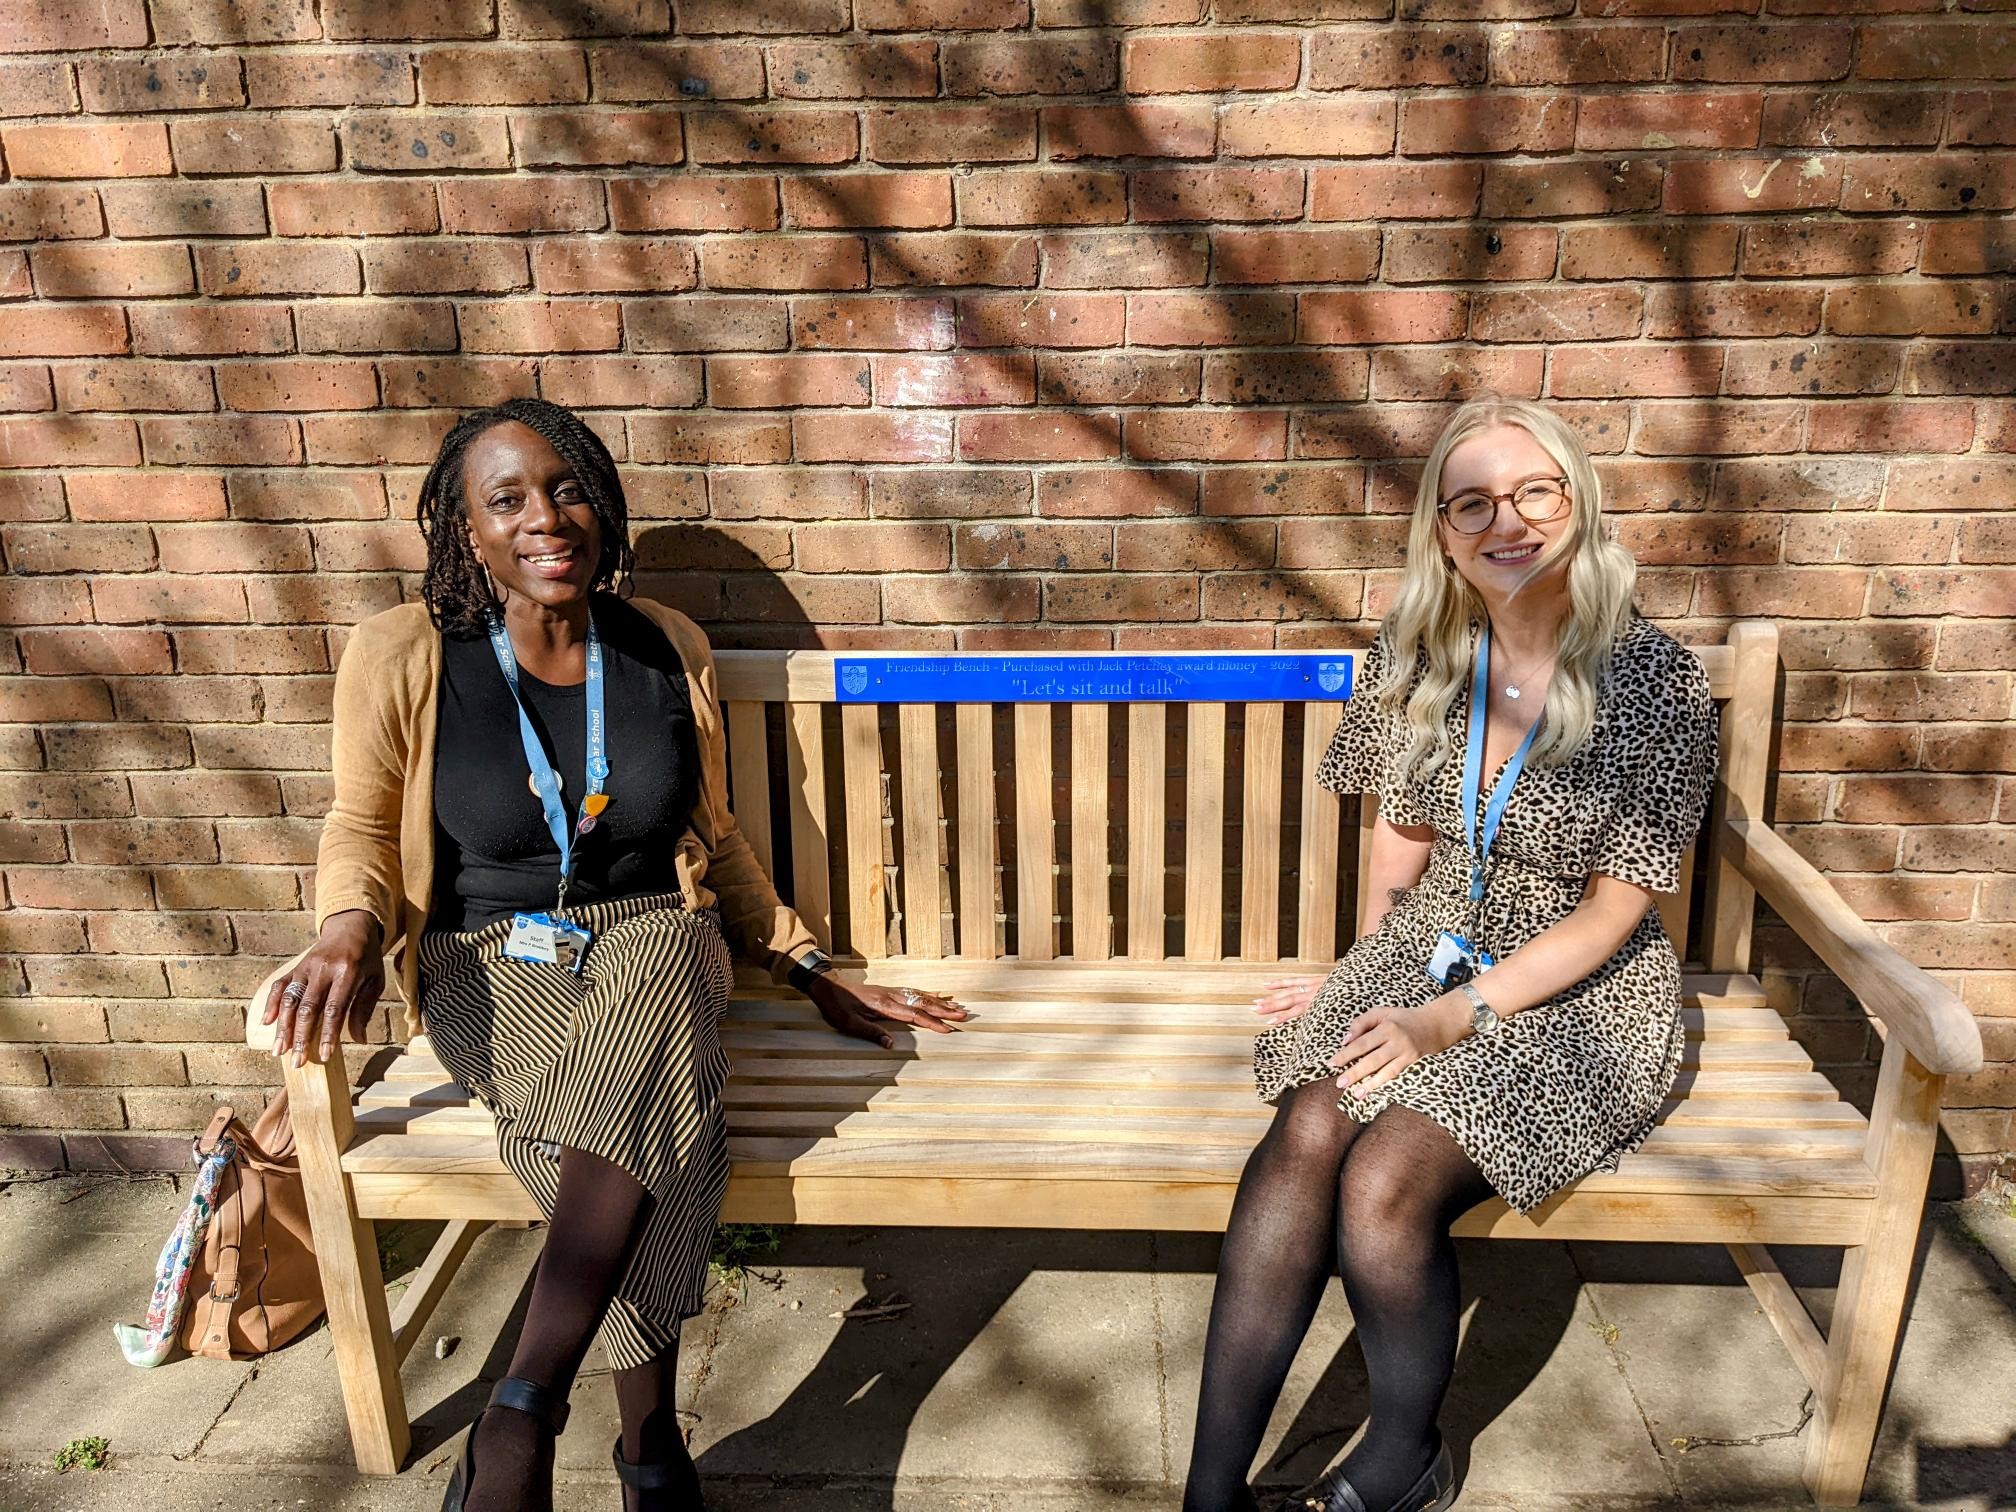 “Let’s sit and talk!” – Leader Award Grant spent on a Friendship Bench